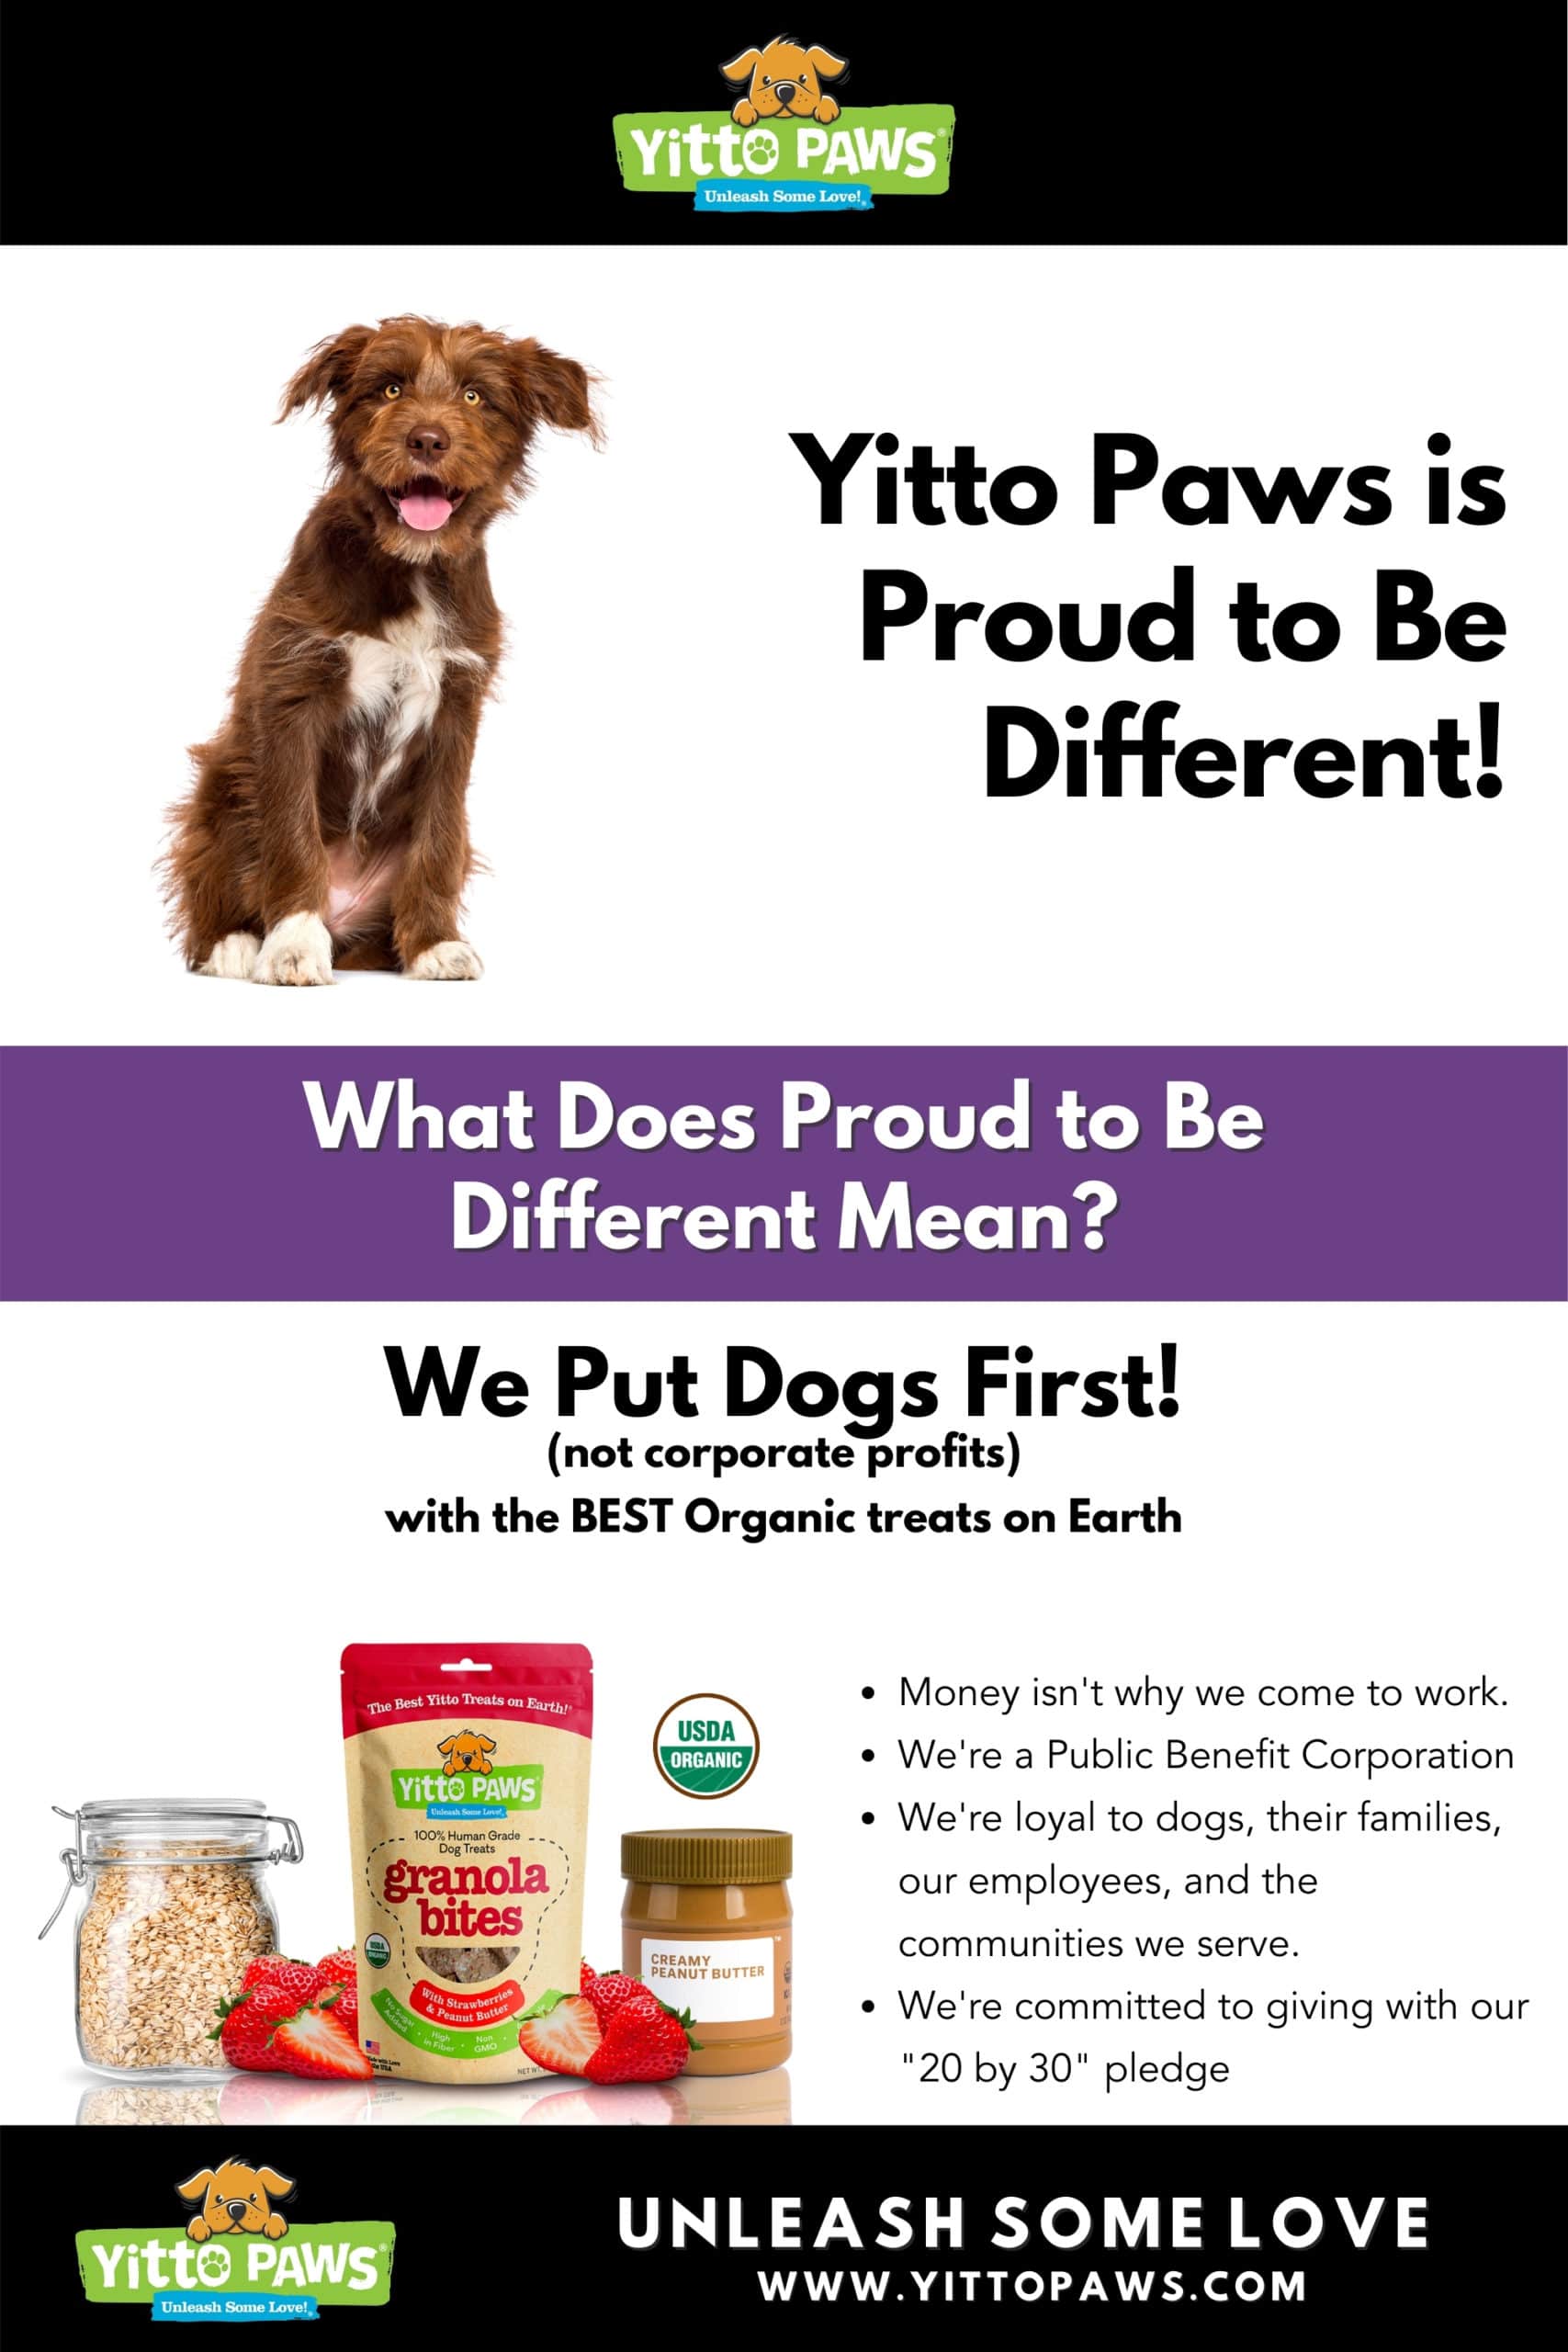 Yitto Paws is Proud to Be Different by Putting Dogs First with the best organic dog treats on earth!